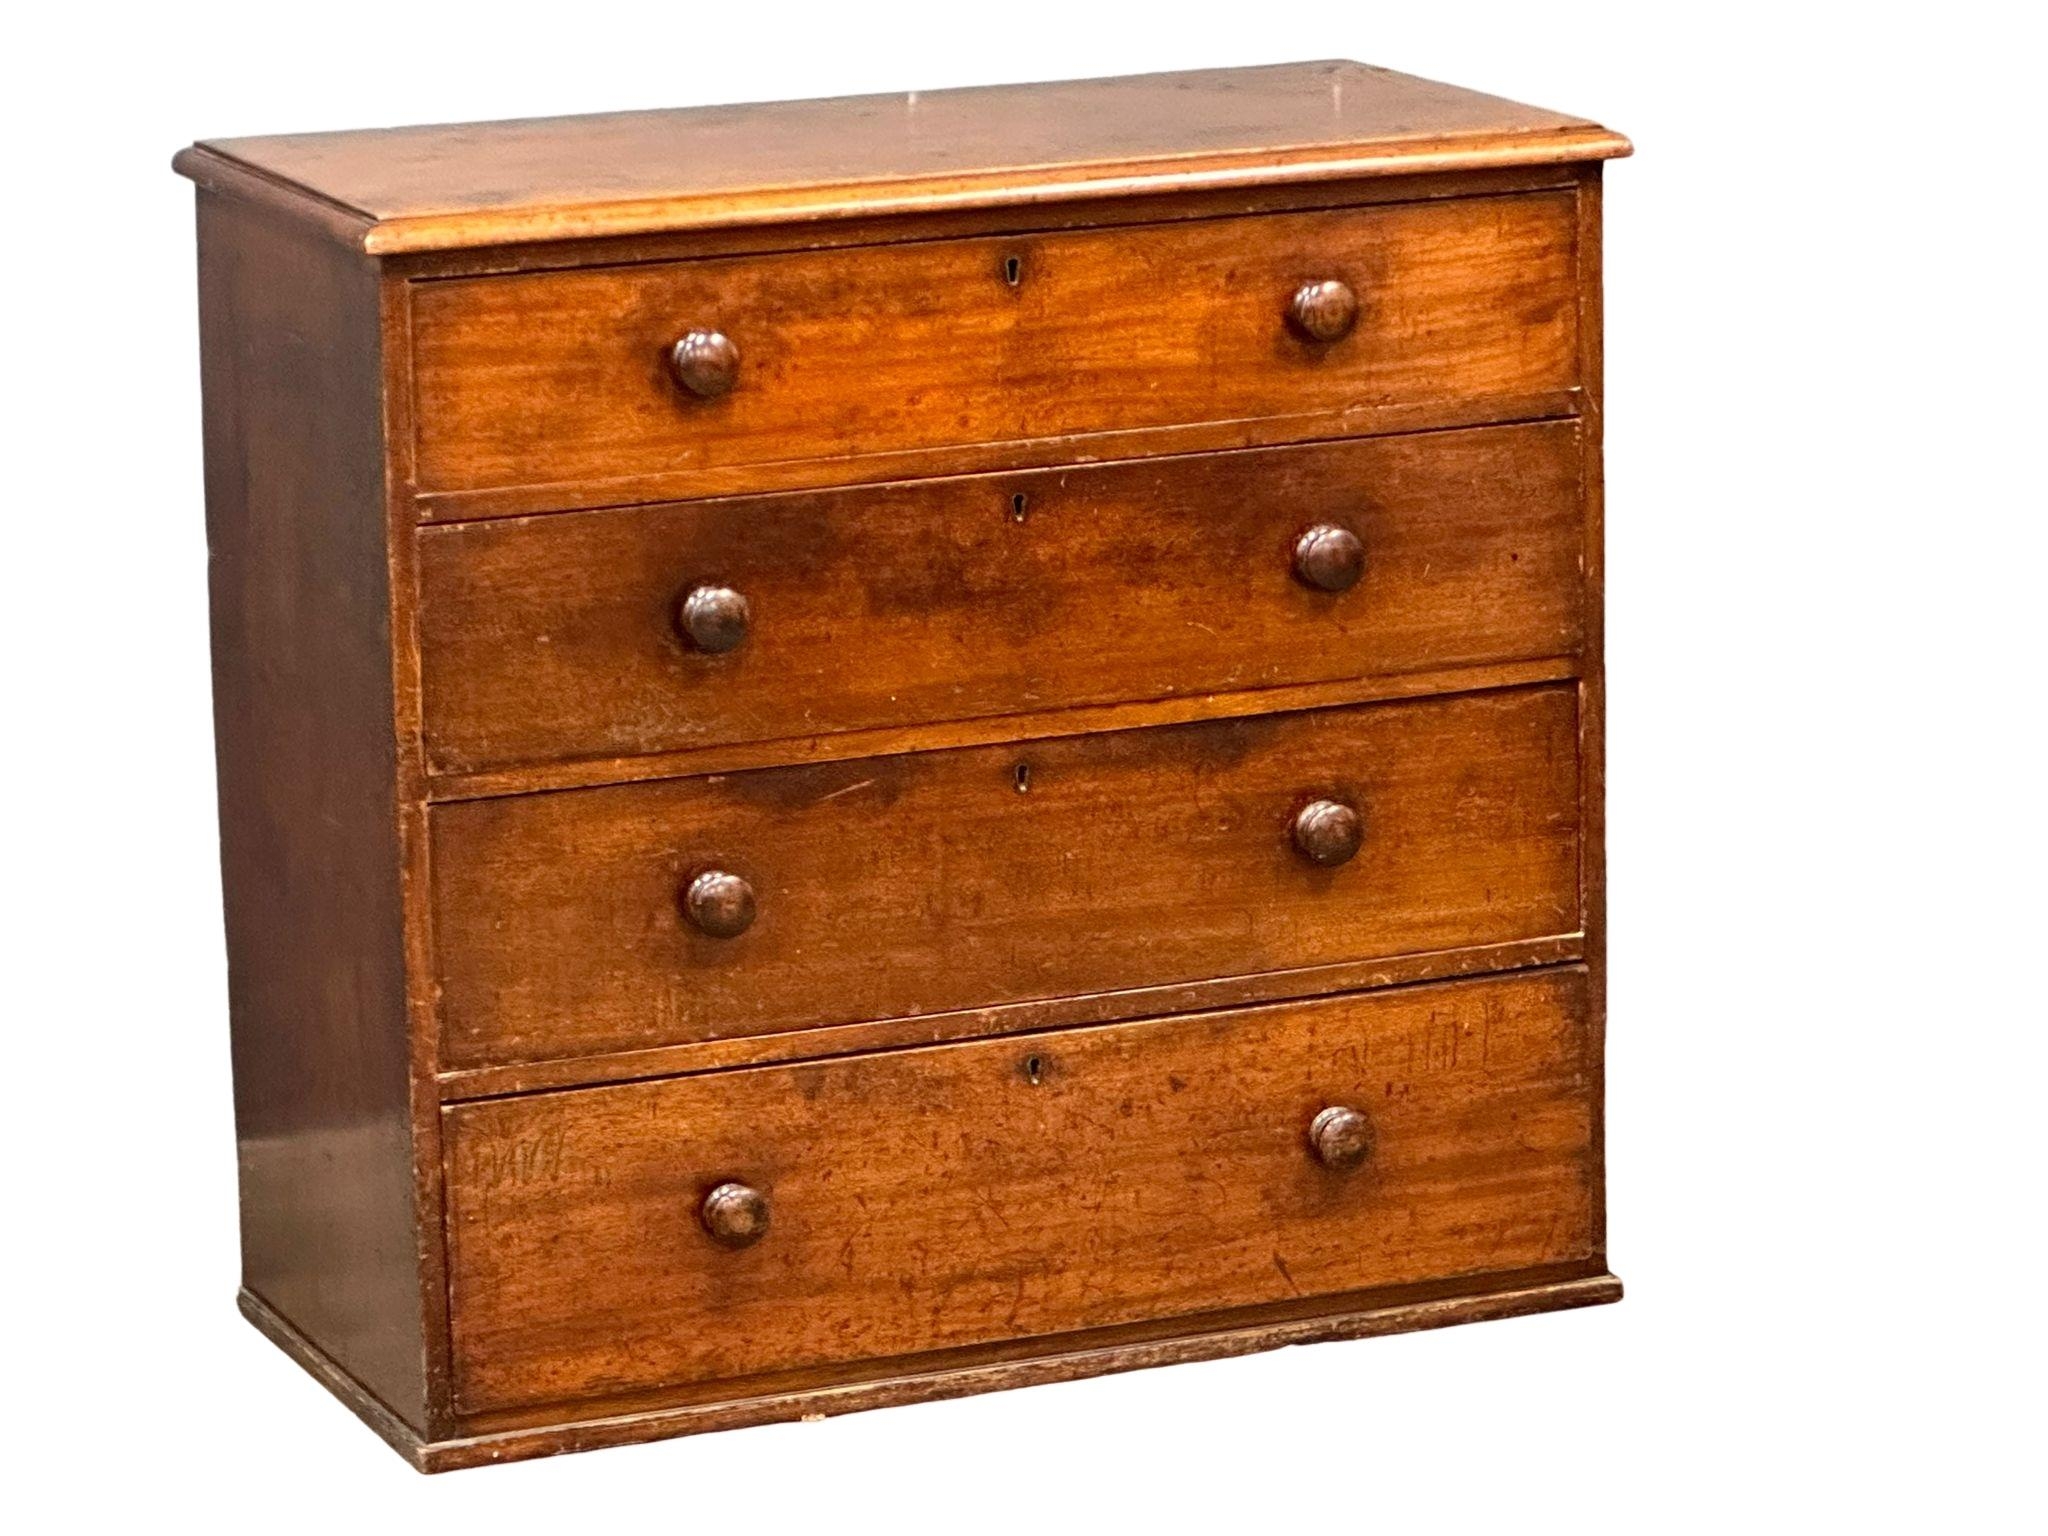 A large Victorian mahogany chest of drawers with bun handles, 109cm x 51cm x 101cm